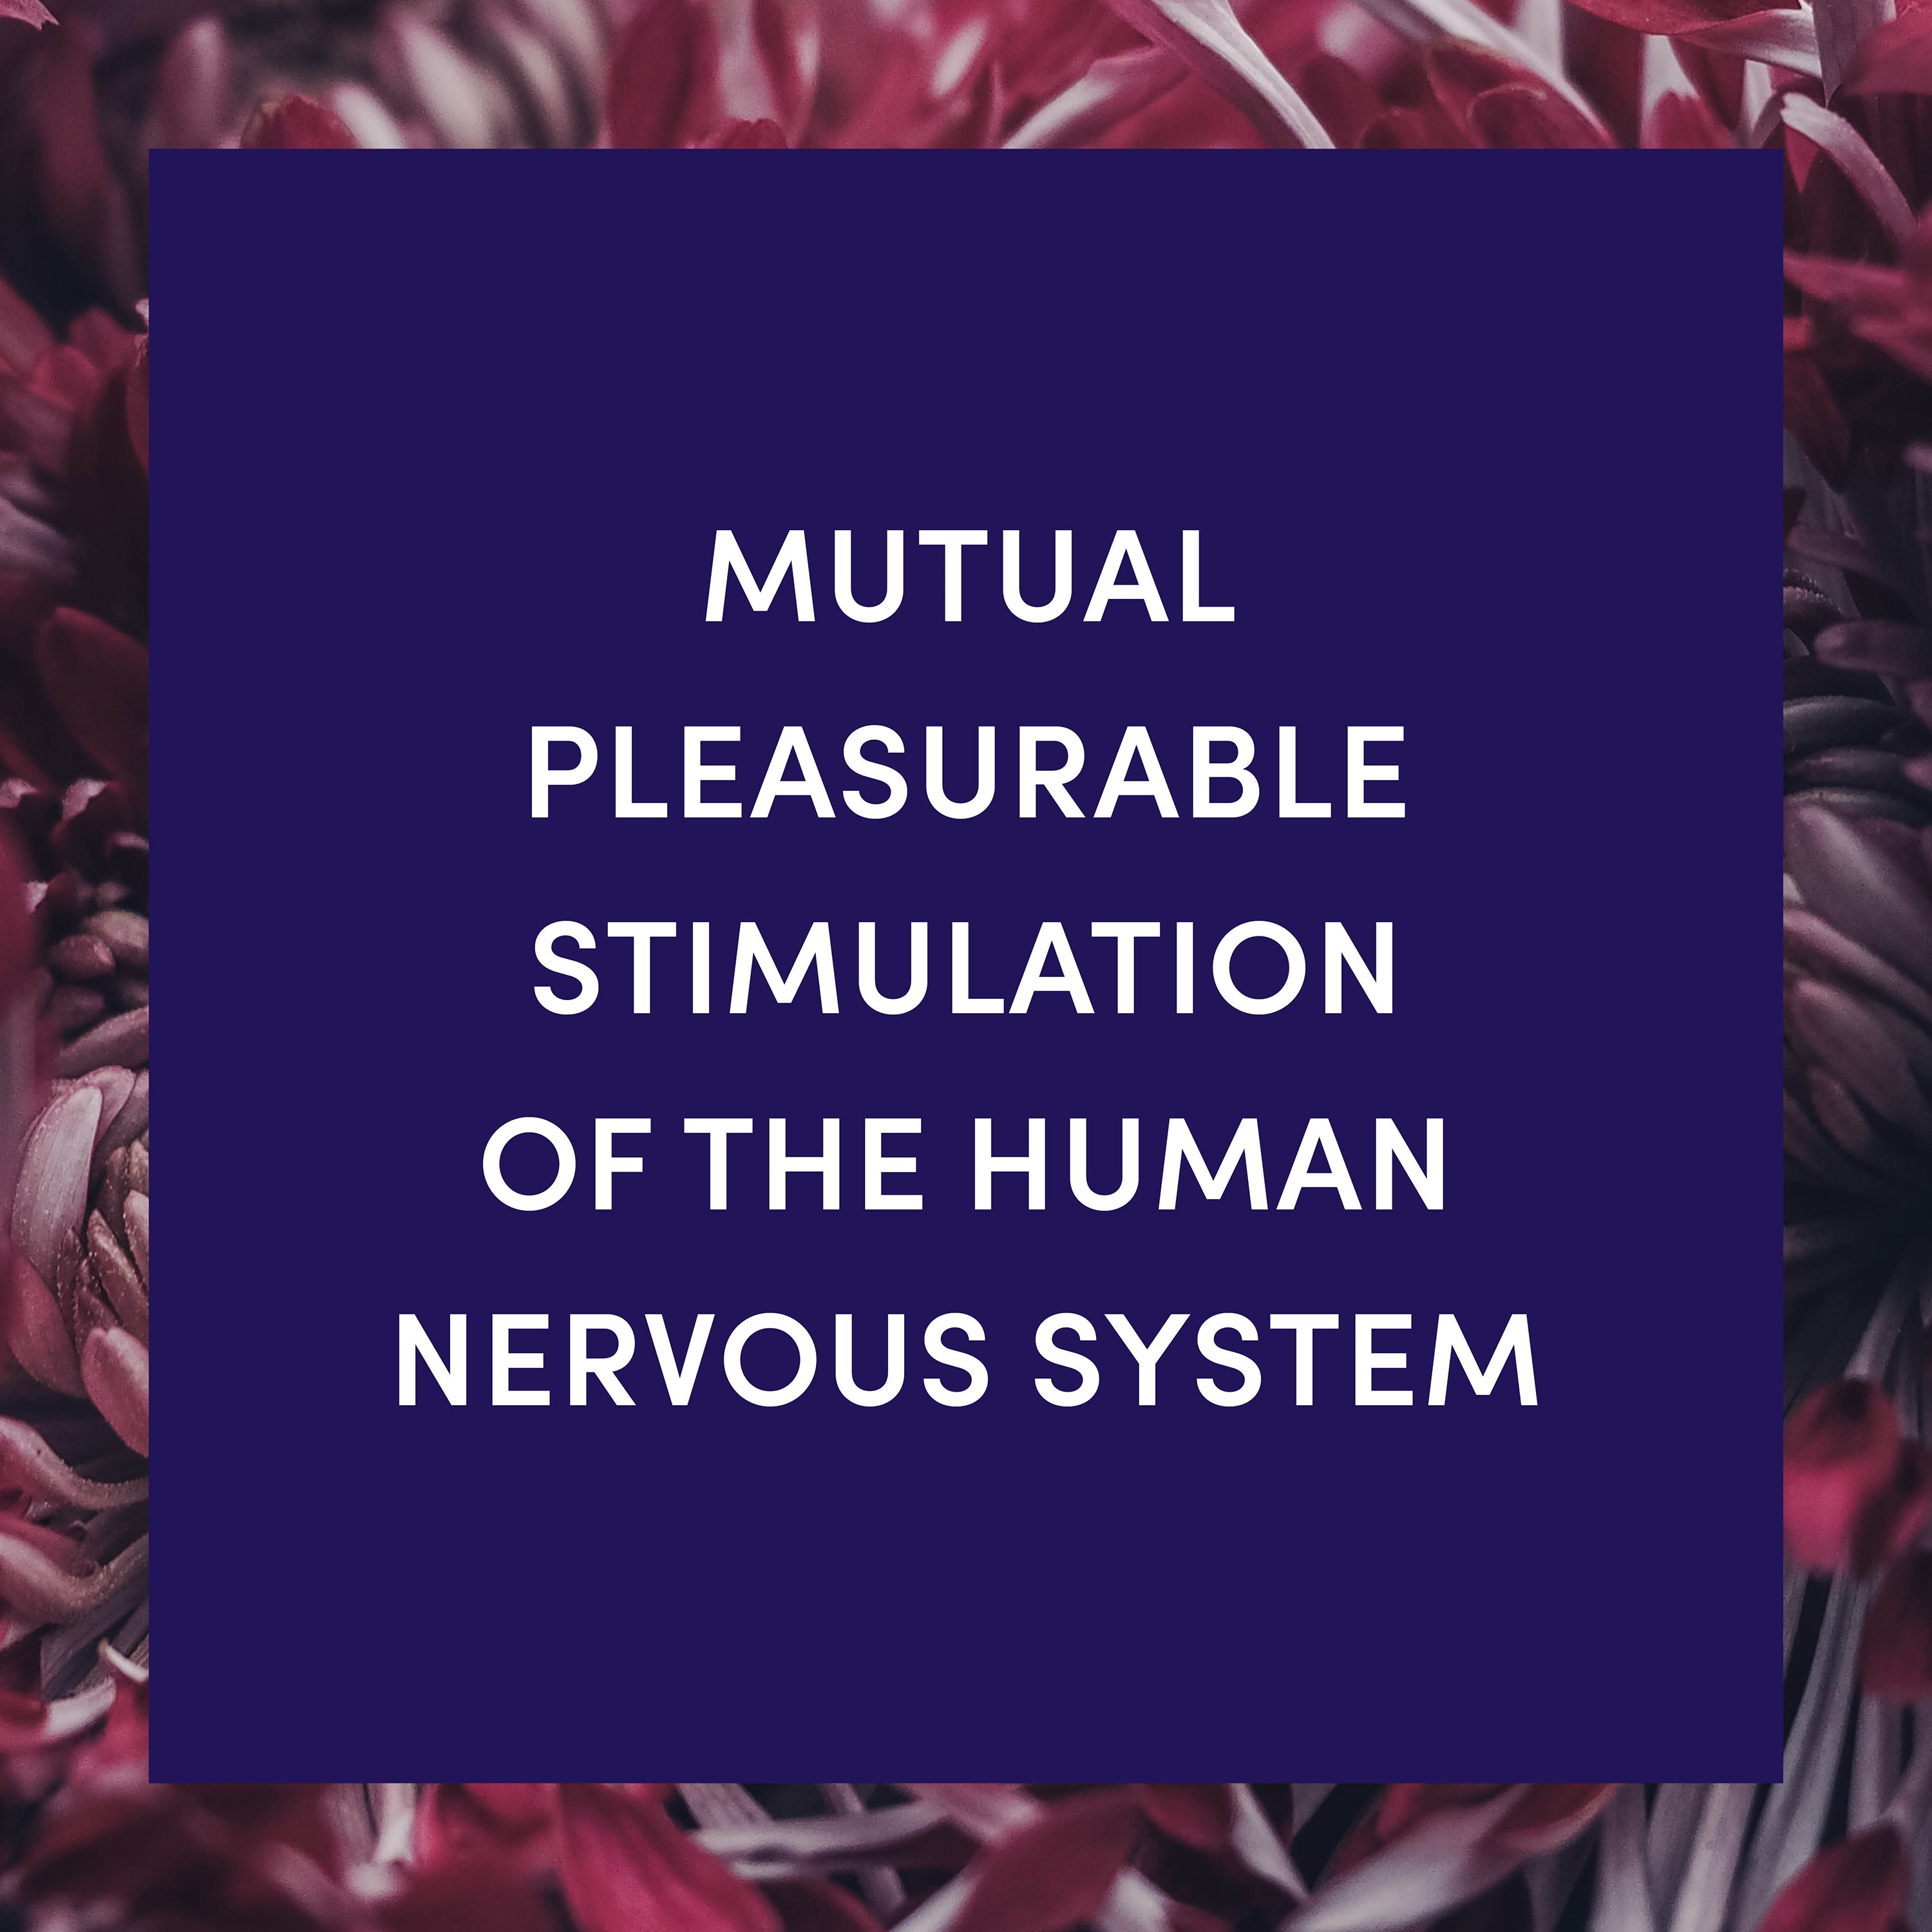 Mutual Pleasurable Stimulation of the Human Nervous System